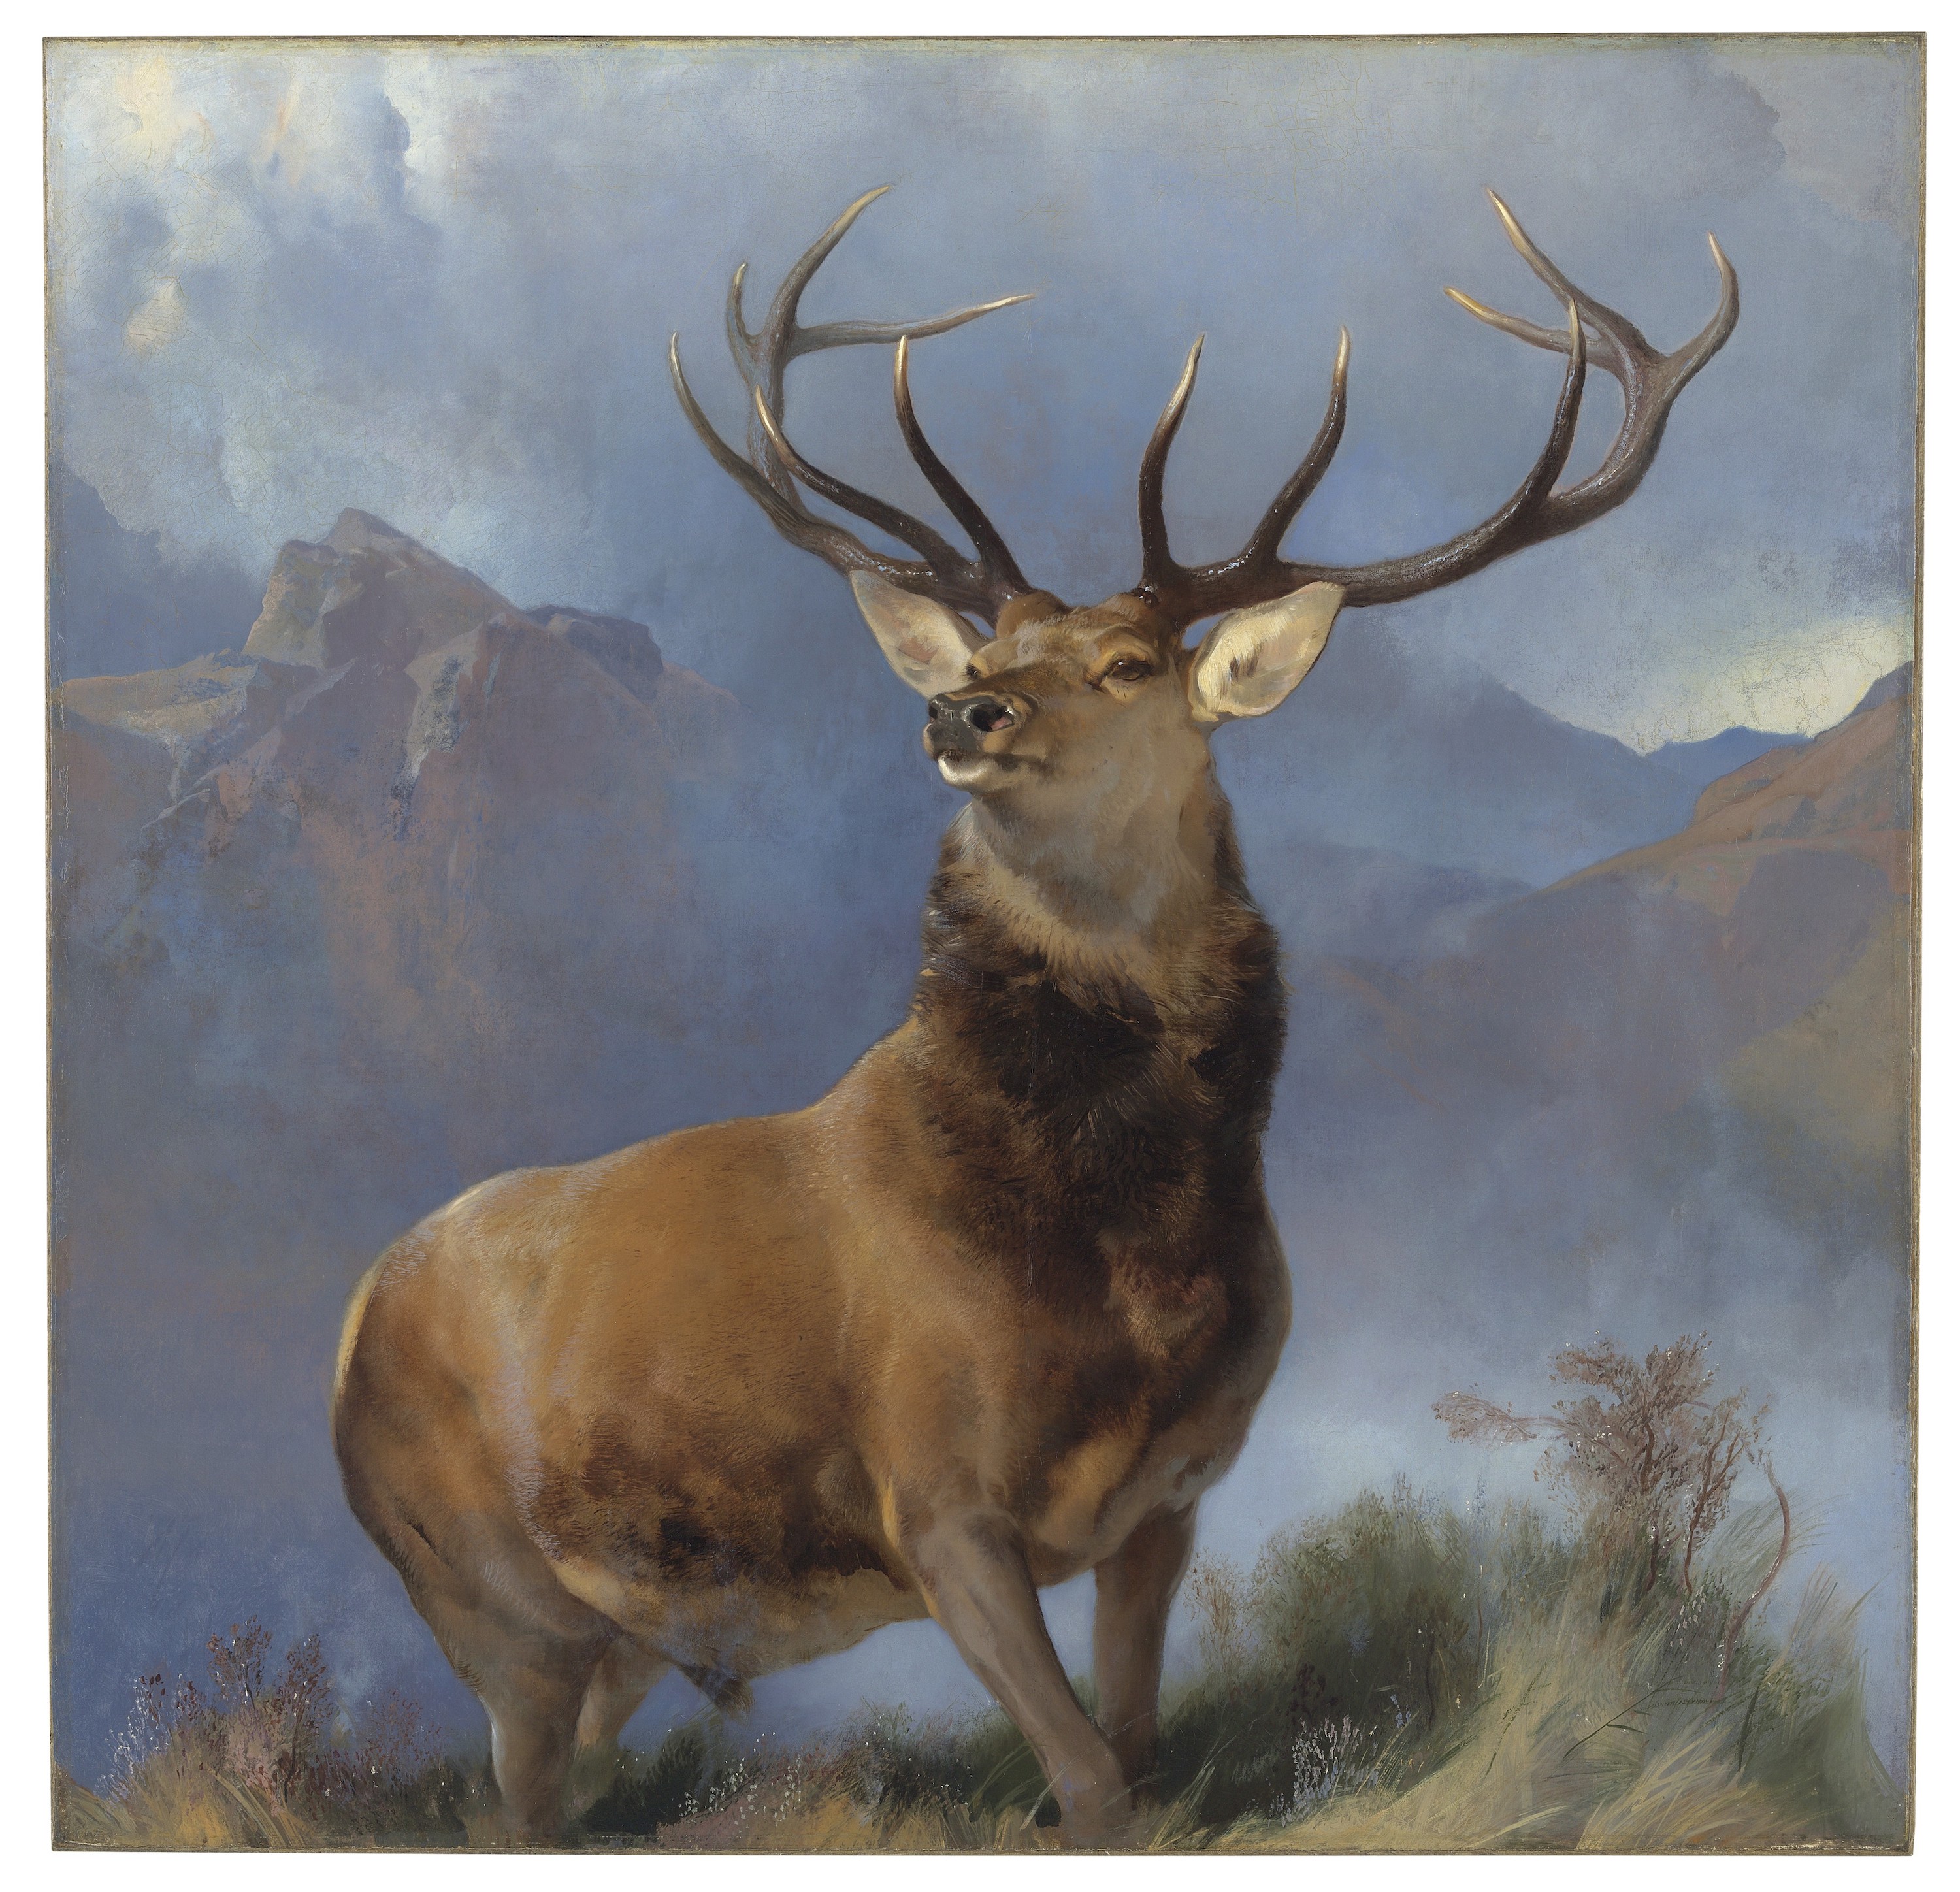 Monarch of the Glen by Sir Edwin Landseer - about 1851 - 163.8 x 168 cm National Galleries of Scotland